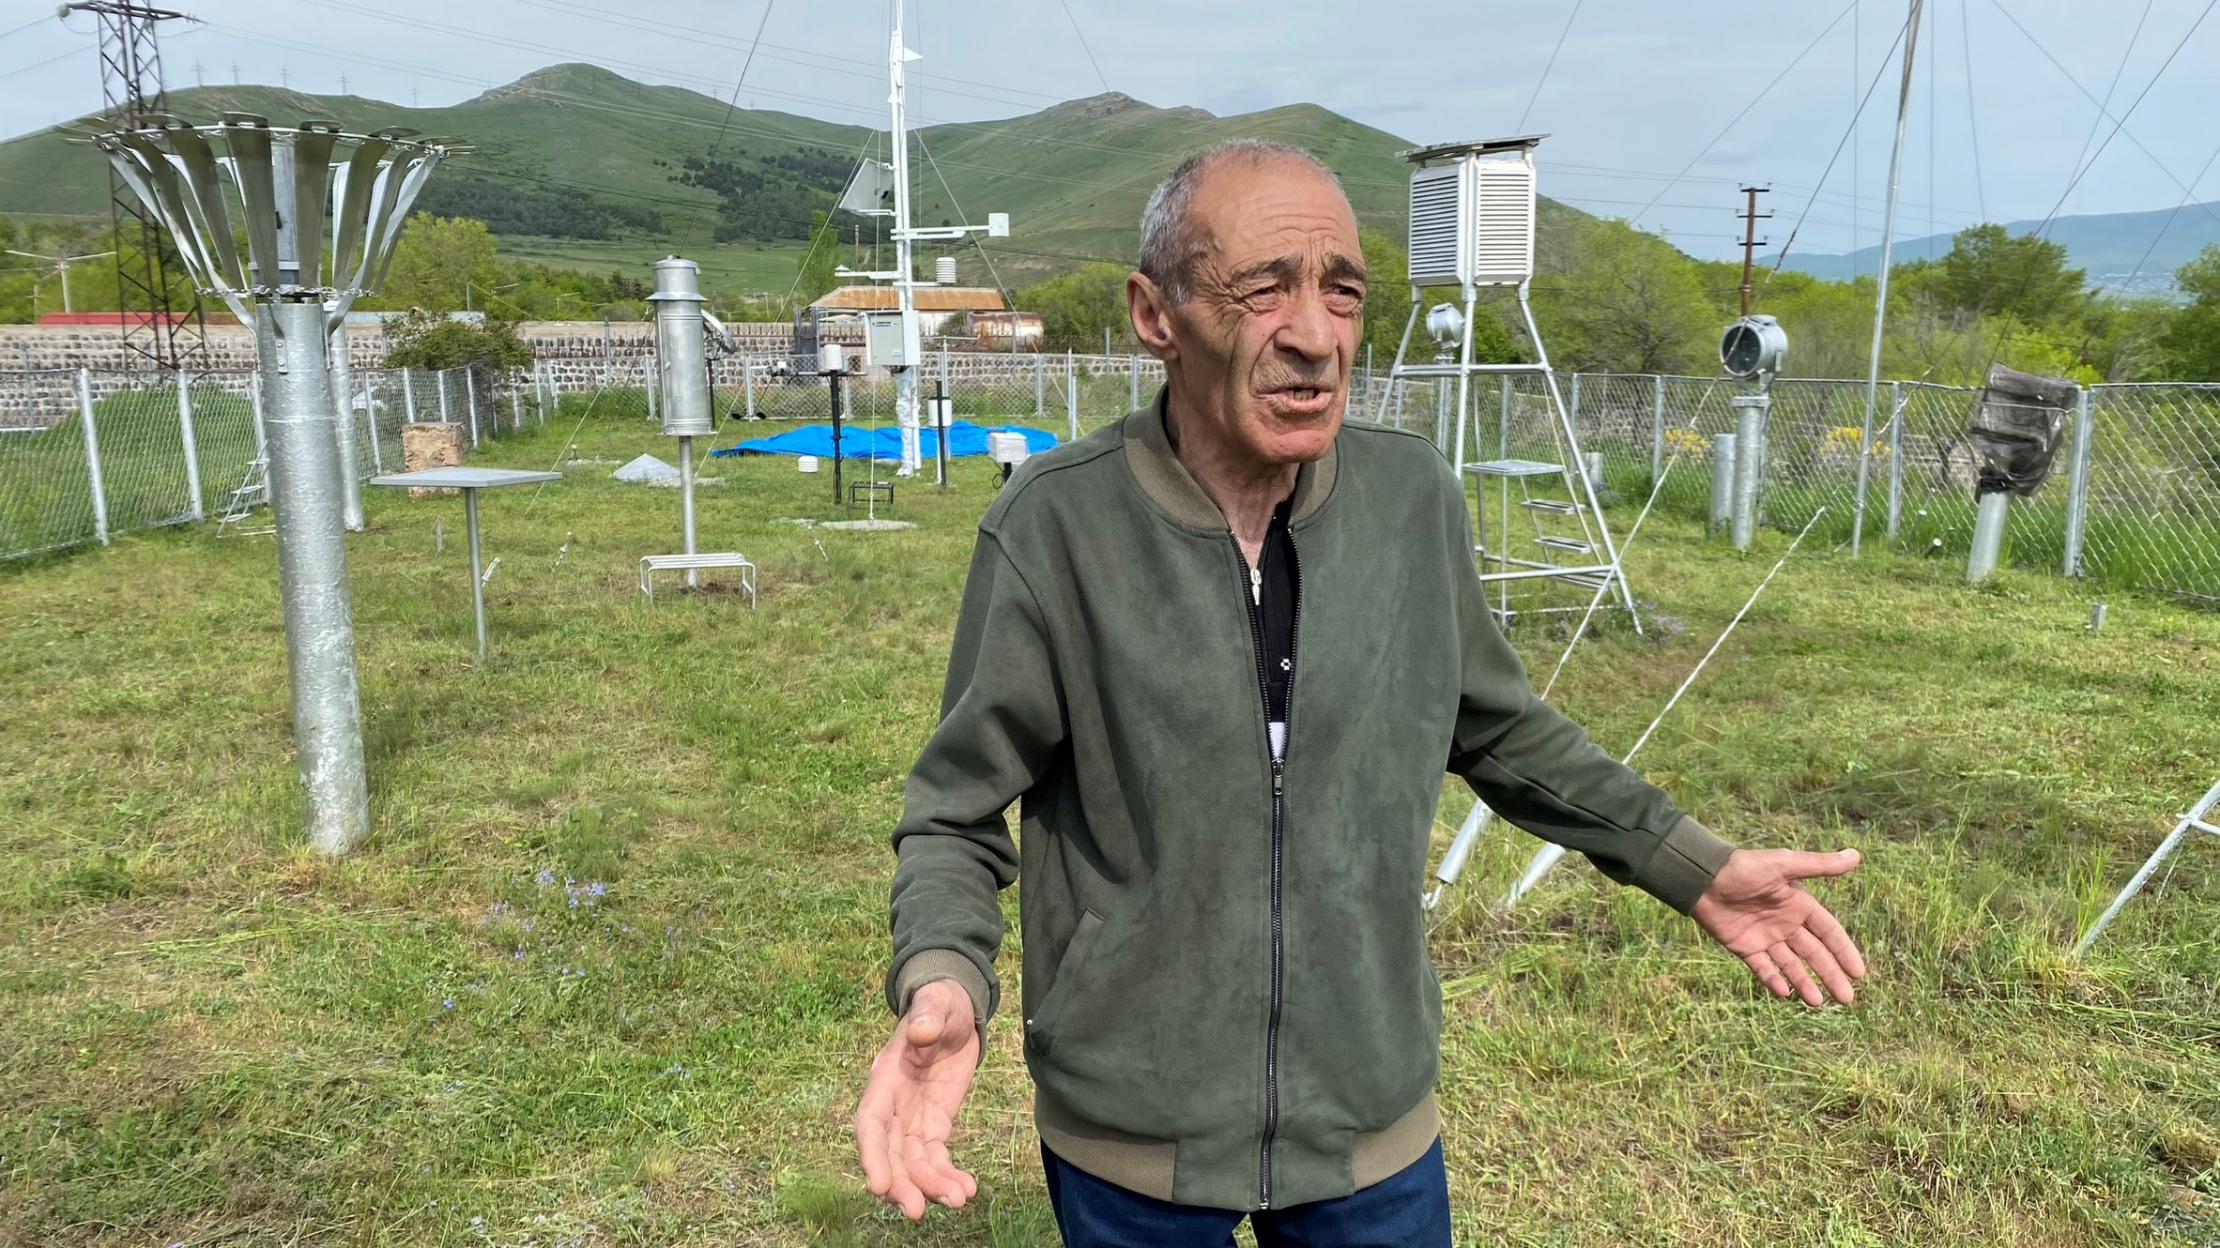 Shahen Vardanyan has been working at the station on Lake Sevan for almost 50 years